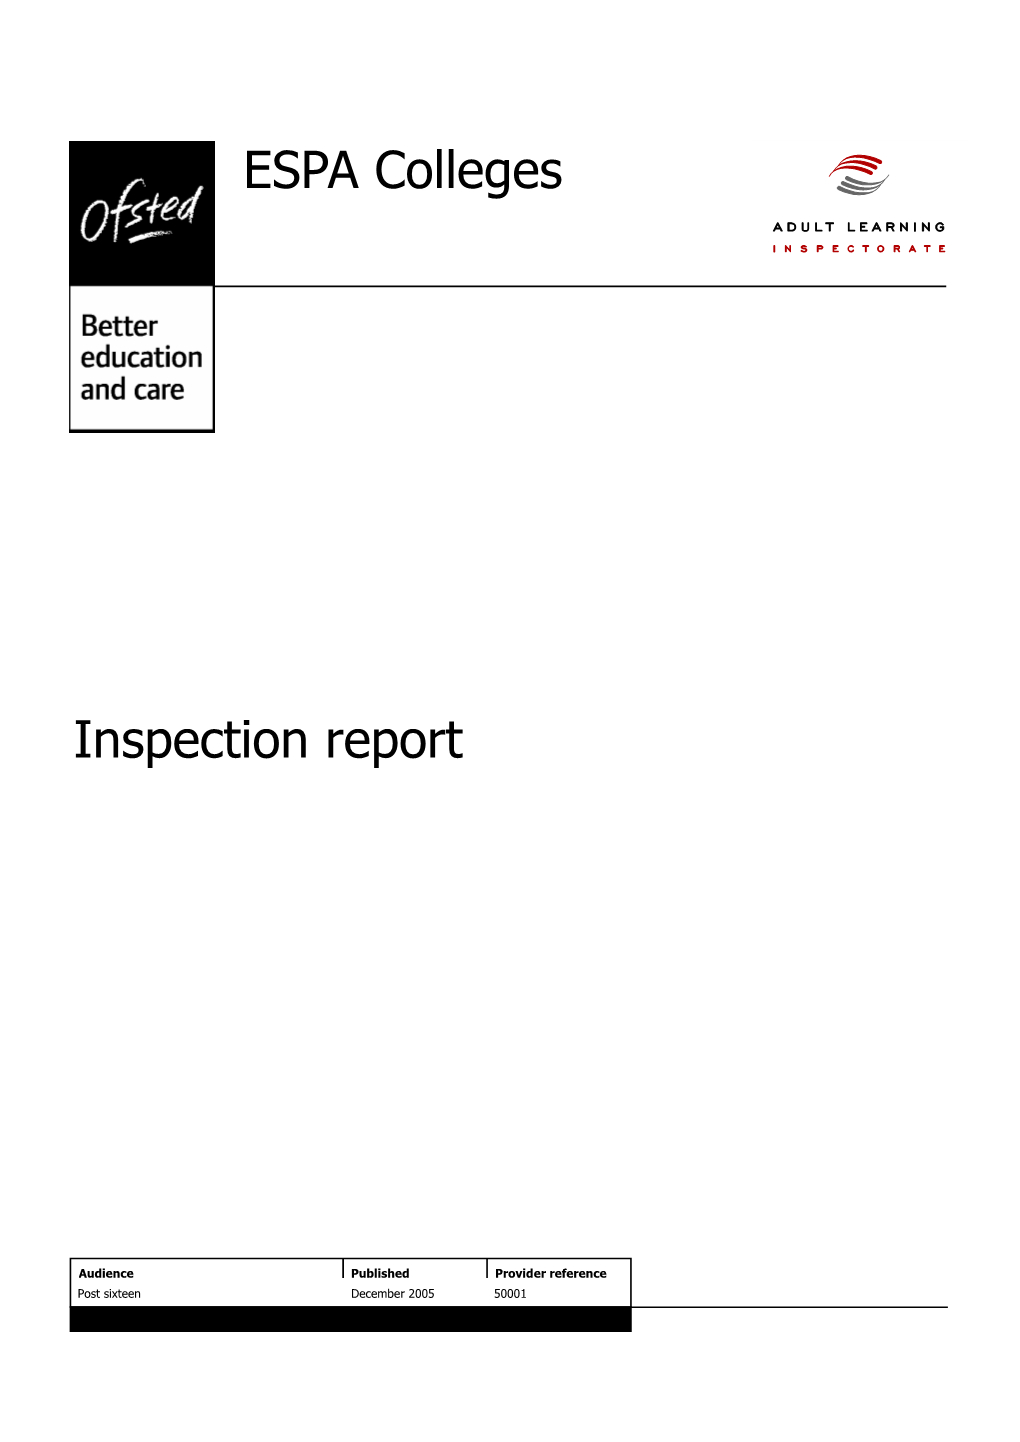 ESPA Colleges Inspection Report